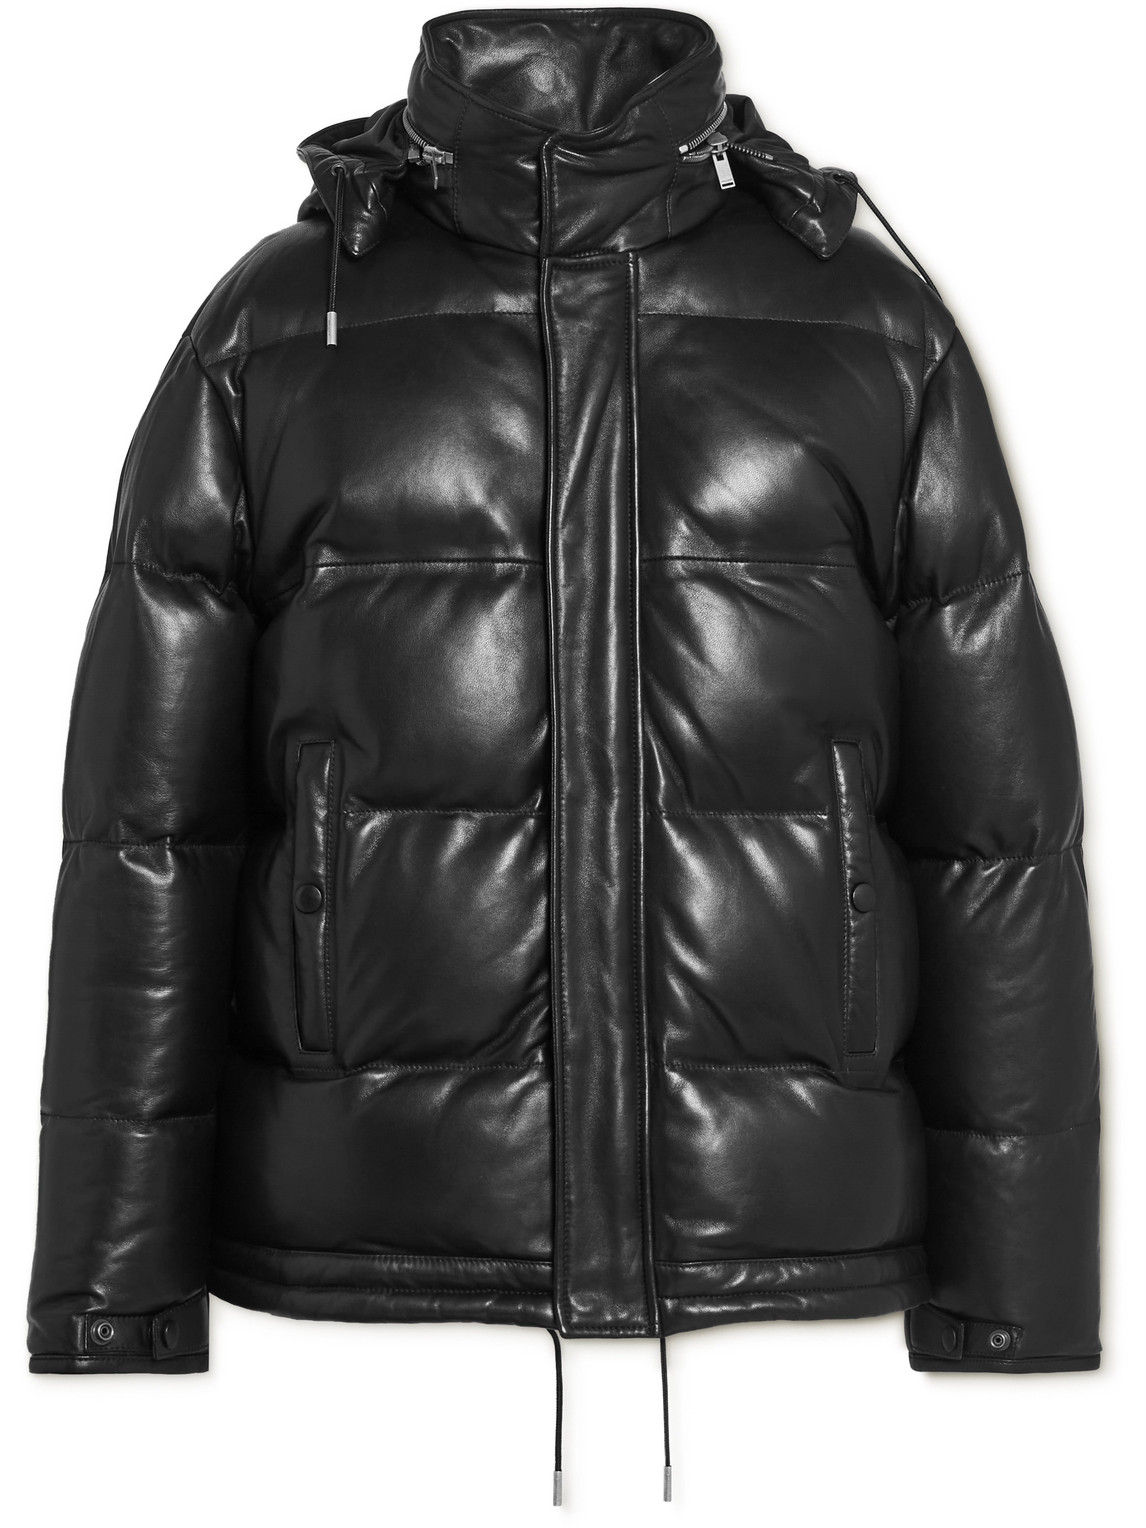 Quilted Leather Hooded Down Jacket